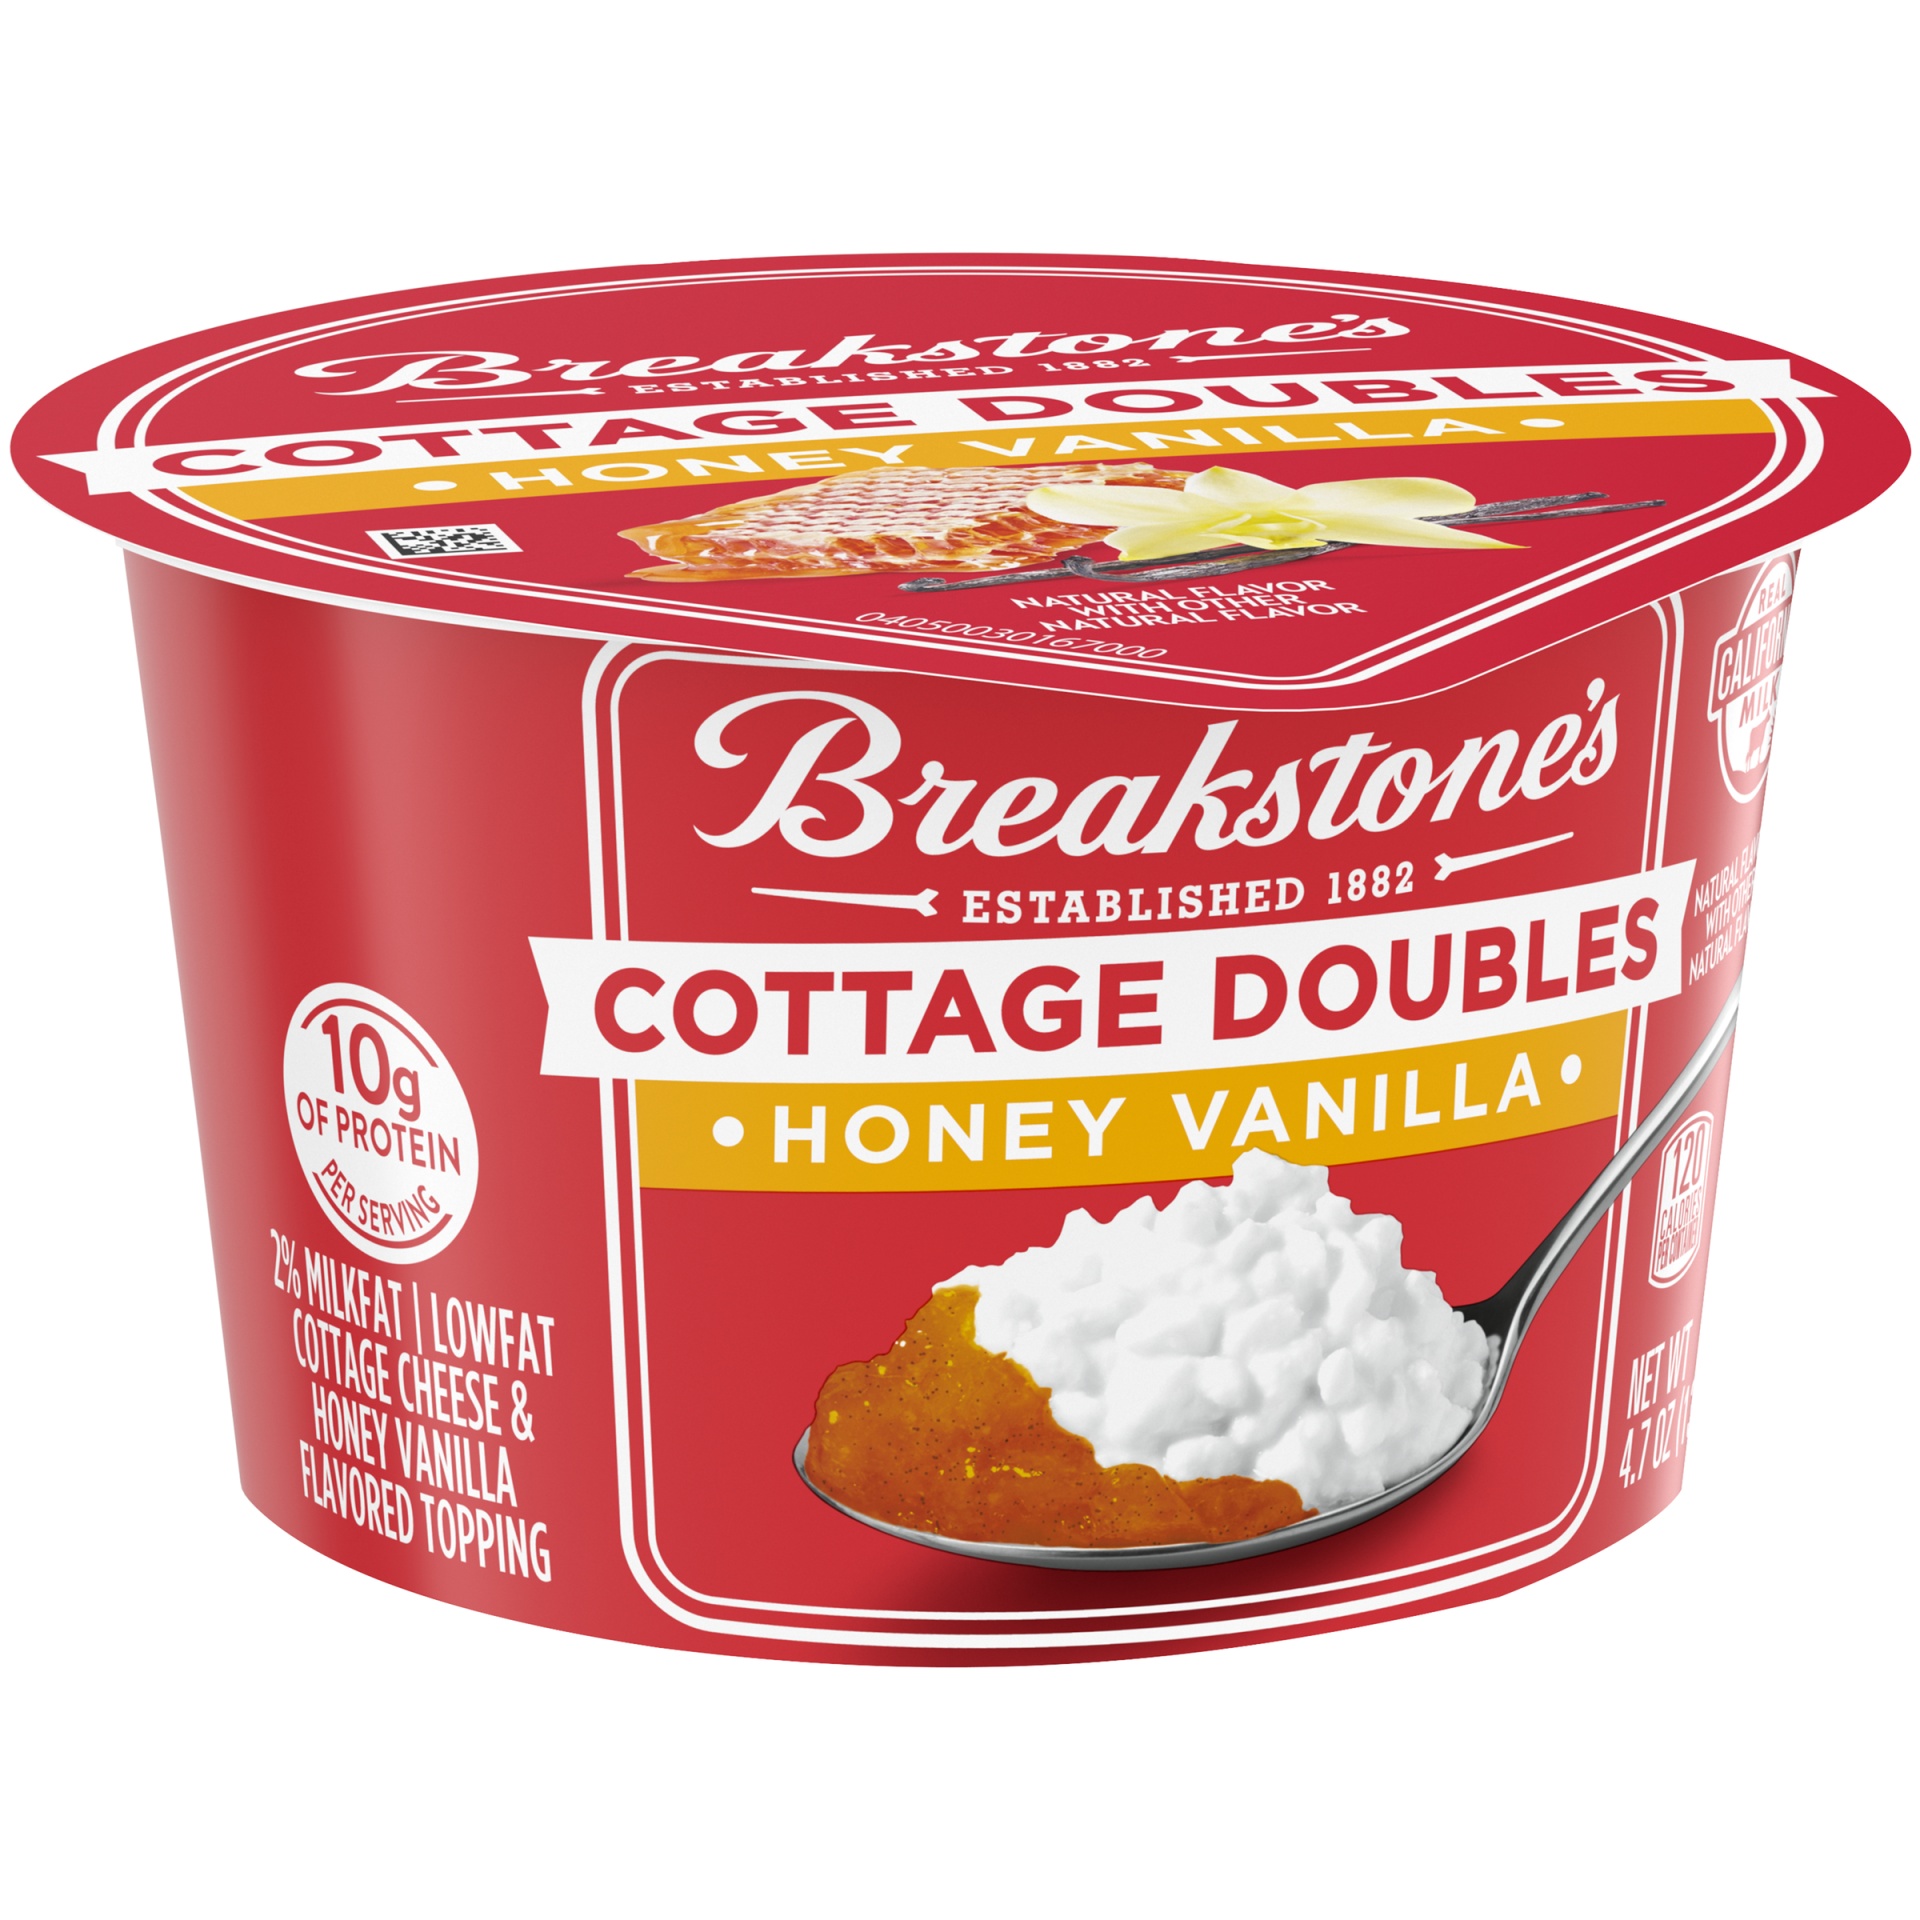 slide 2 of 6, Breakstone's Cottage Doubles Lowfat Cottage Cheese & Honey Vanilla Topping with 2% Milkfat Cup, 4.7 oz